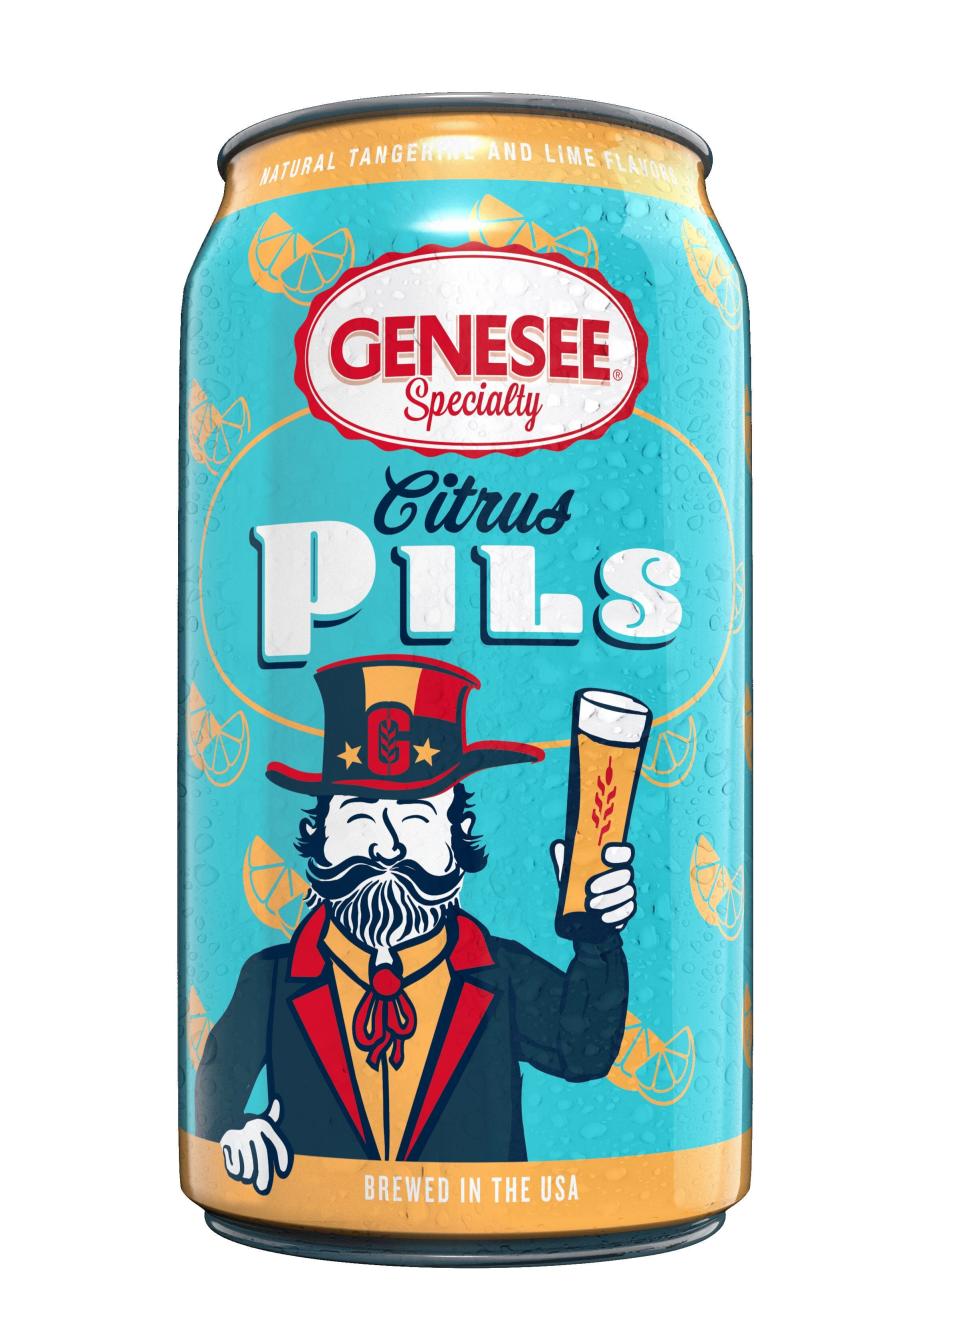 The fans wanted a winter citrus beer and Genesee is releasing one, Citrus Pils, in November.